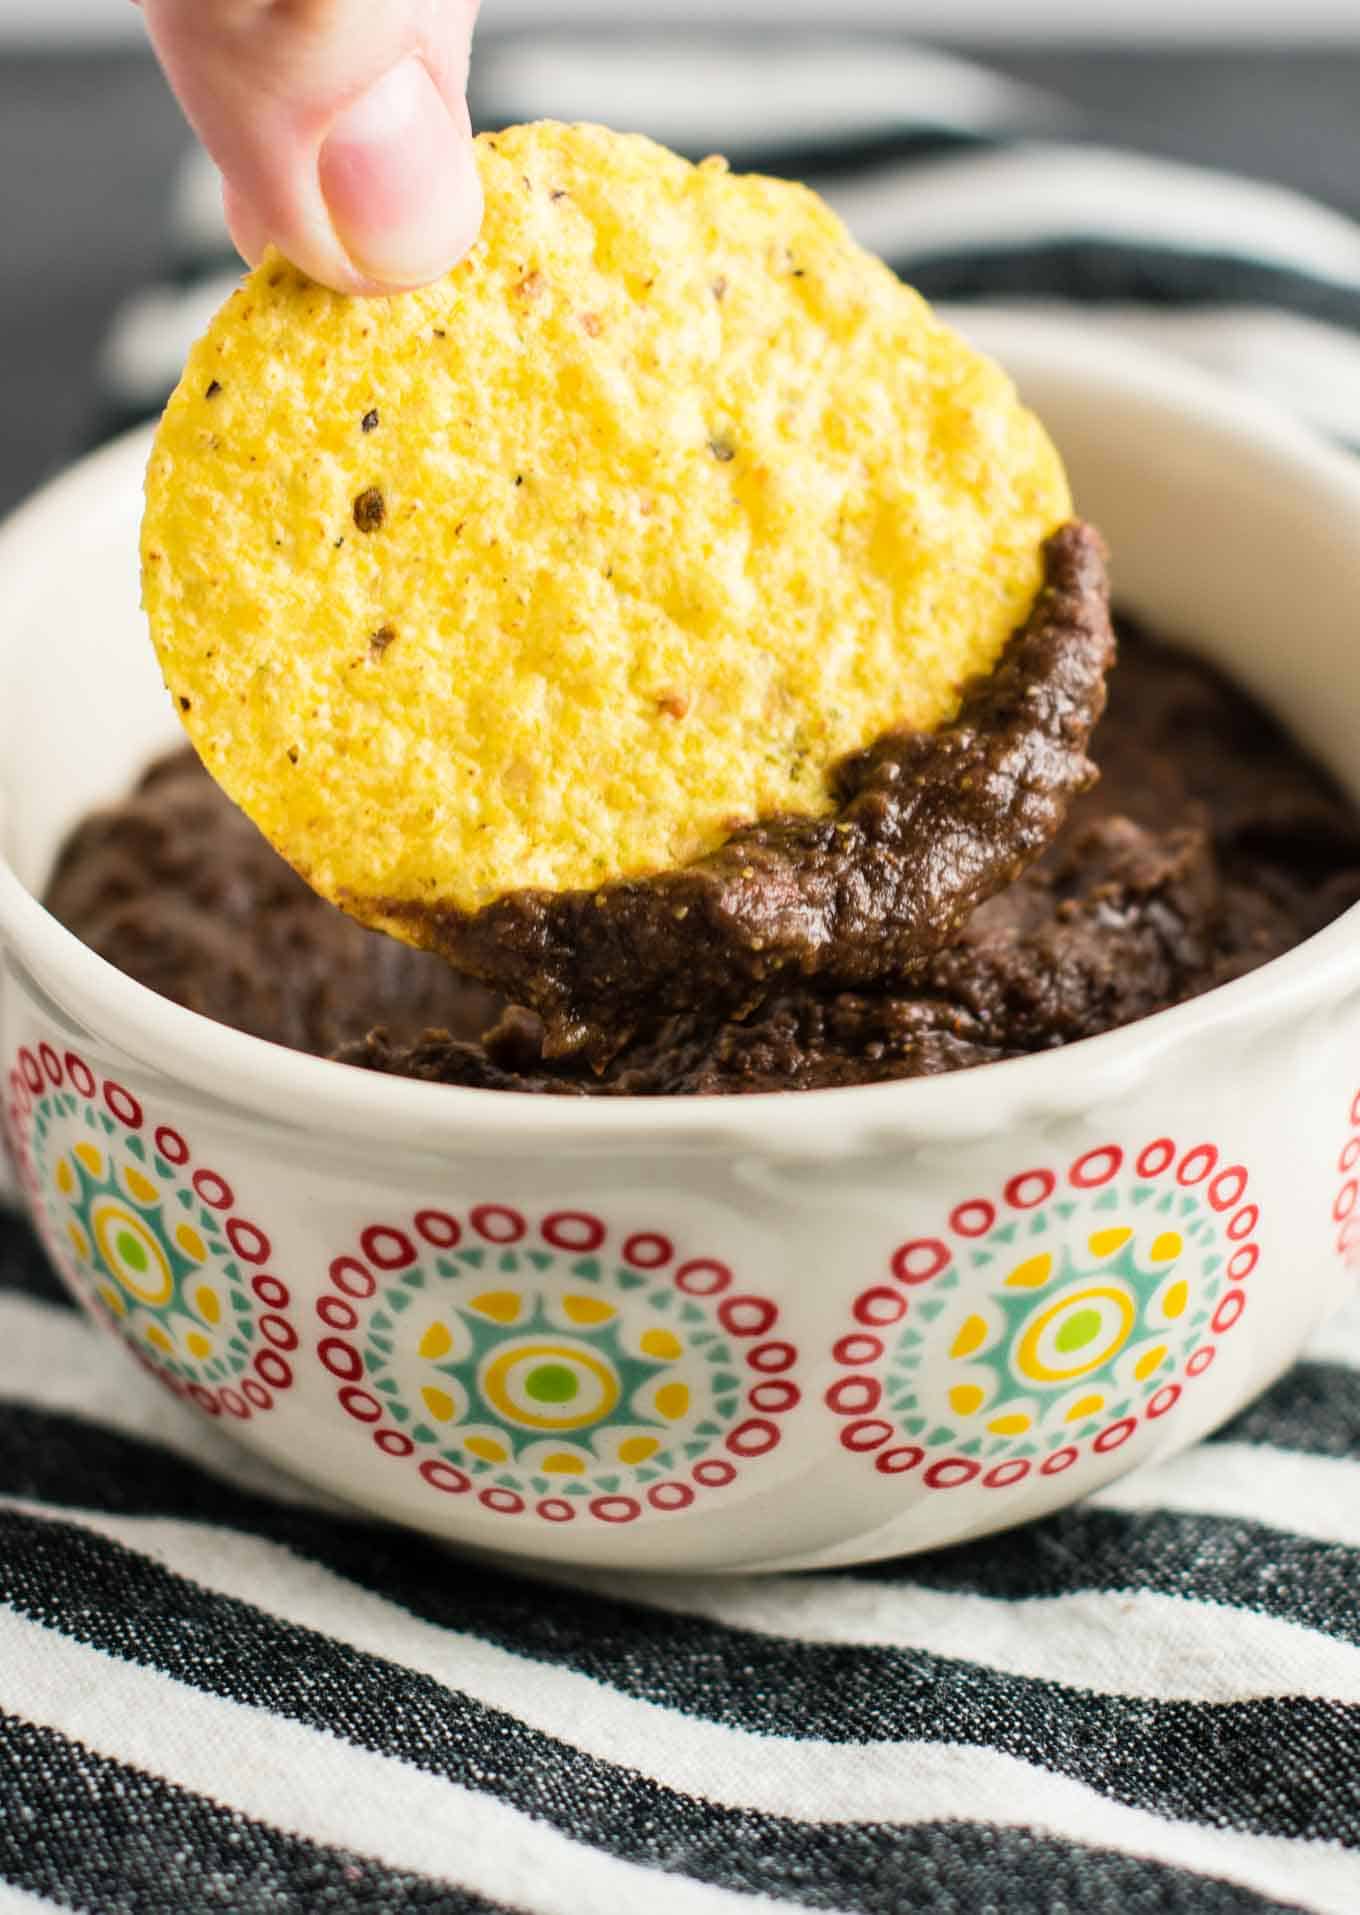 Learn how to make refried beans with just black beans, lime, and a few simple spices. I make this recipe all the time!